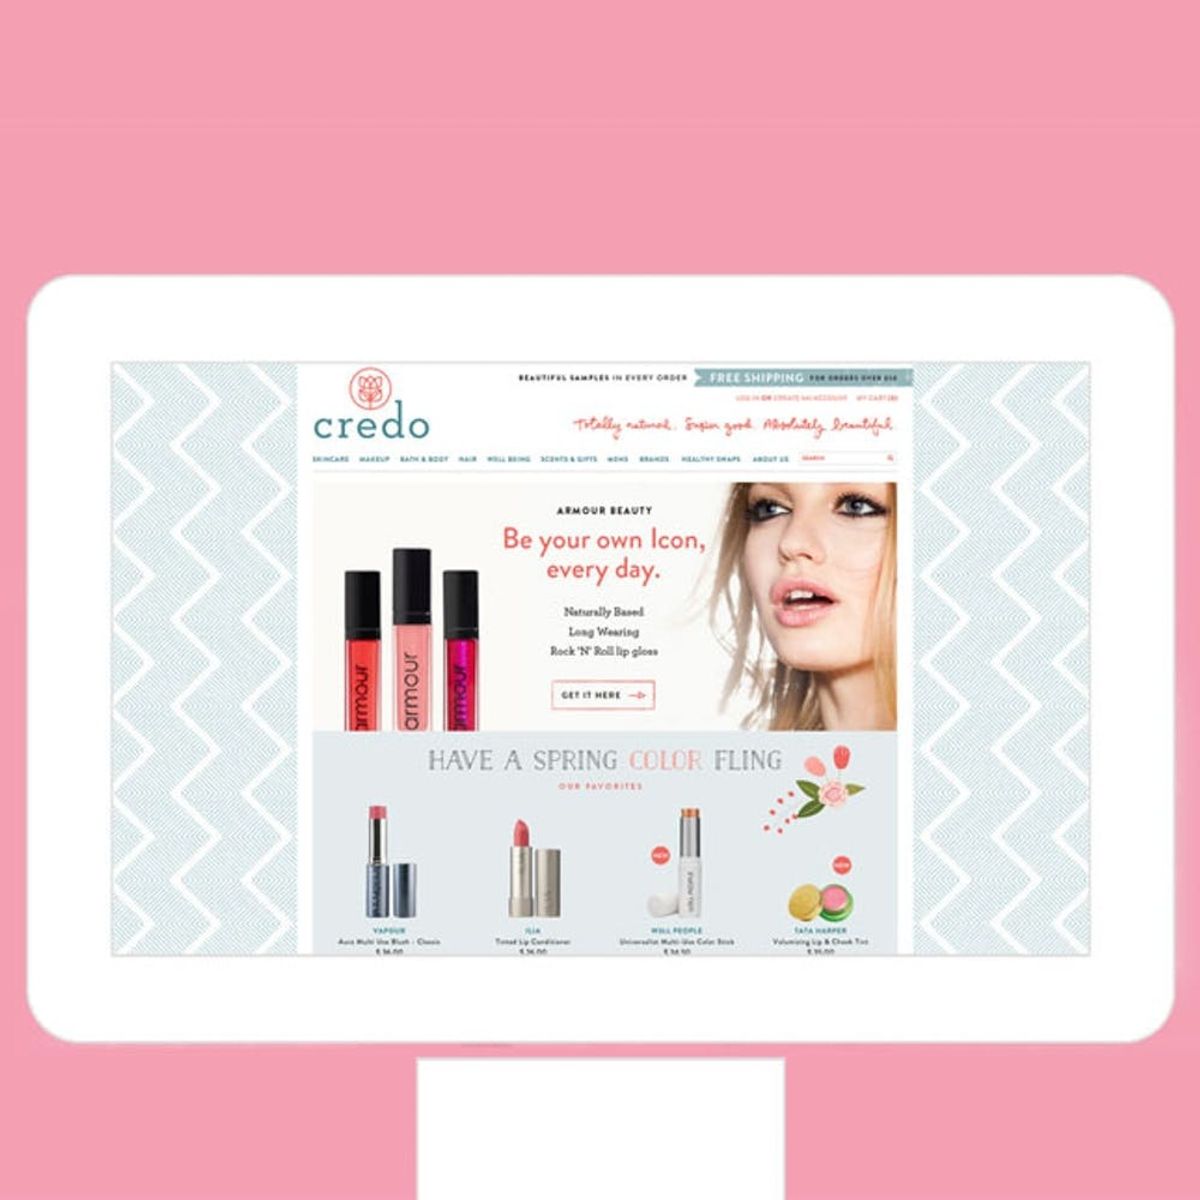 This New Site Is like Sephora for All-Natural Makeup